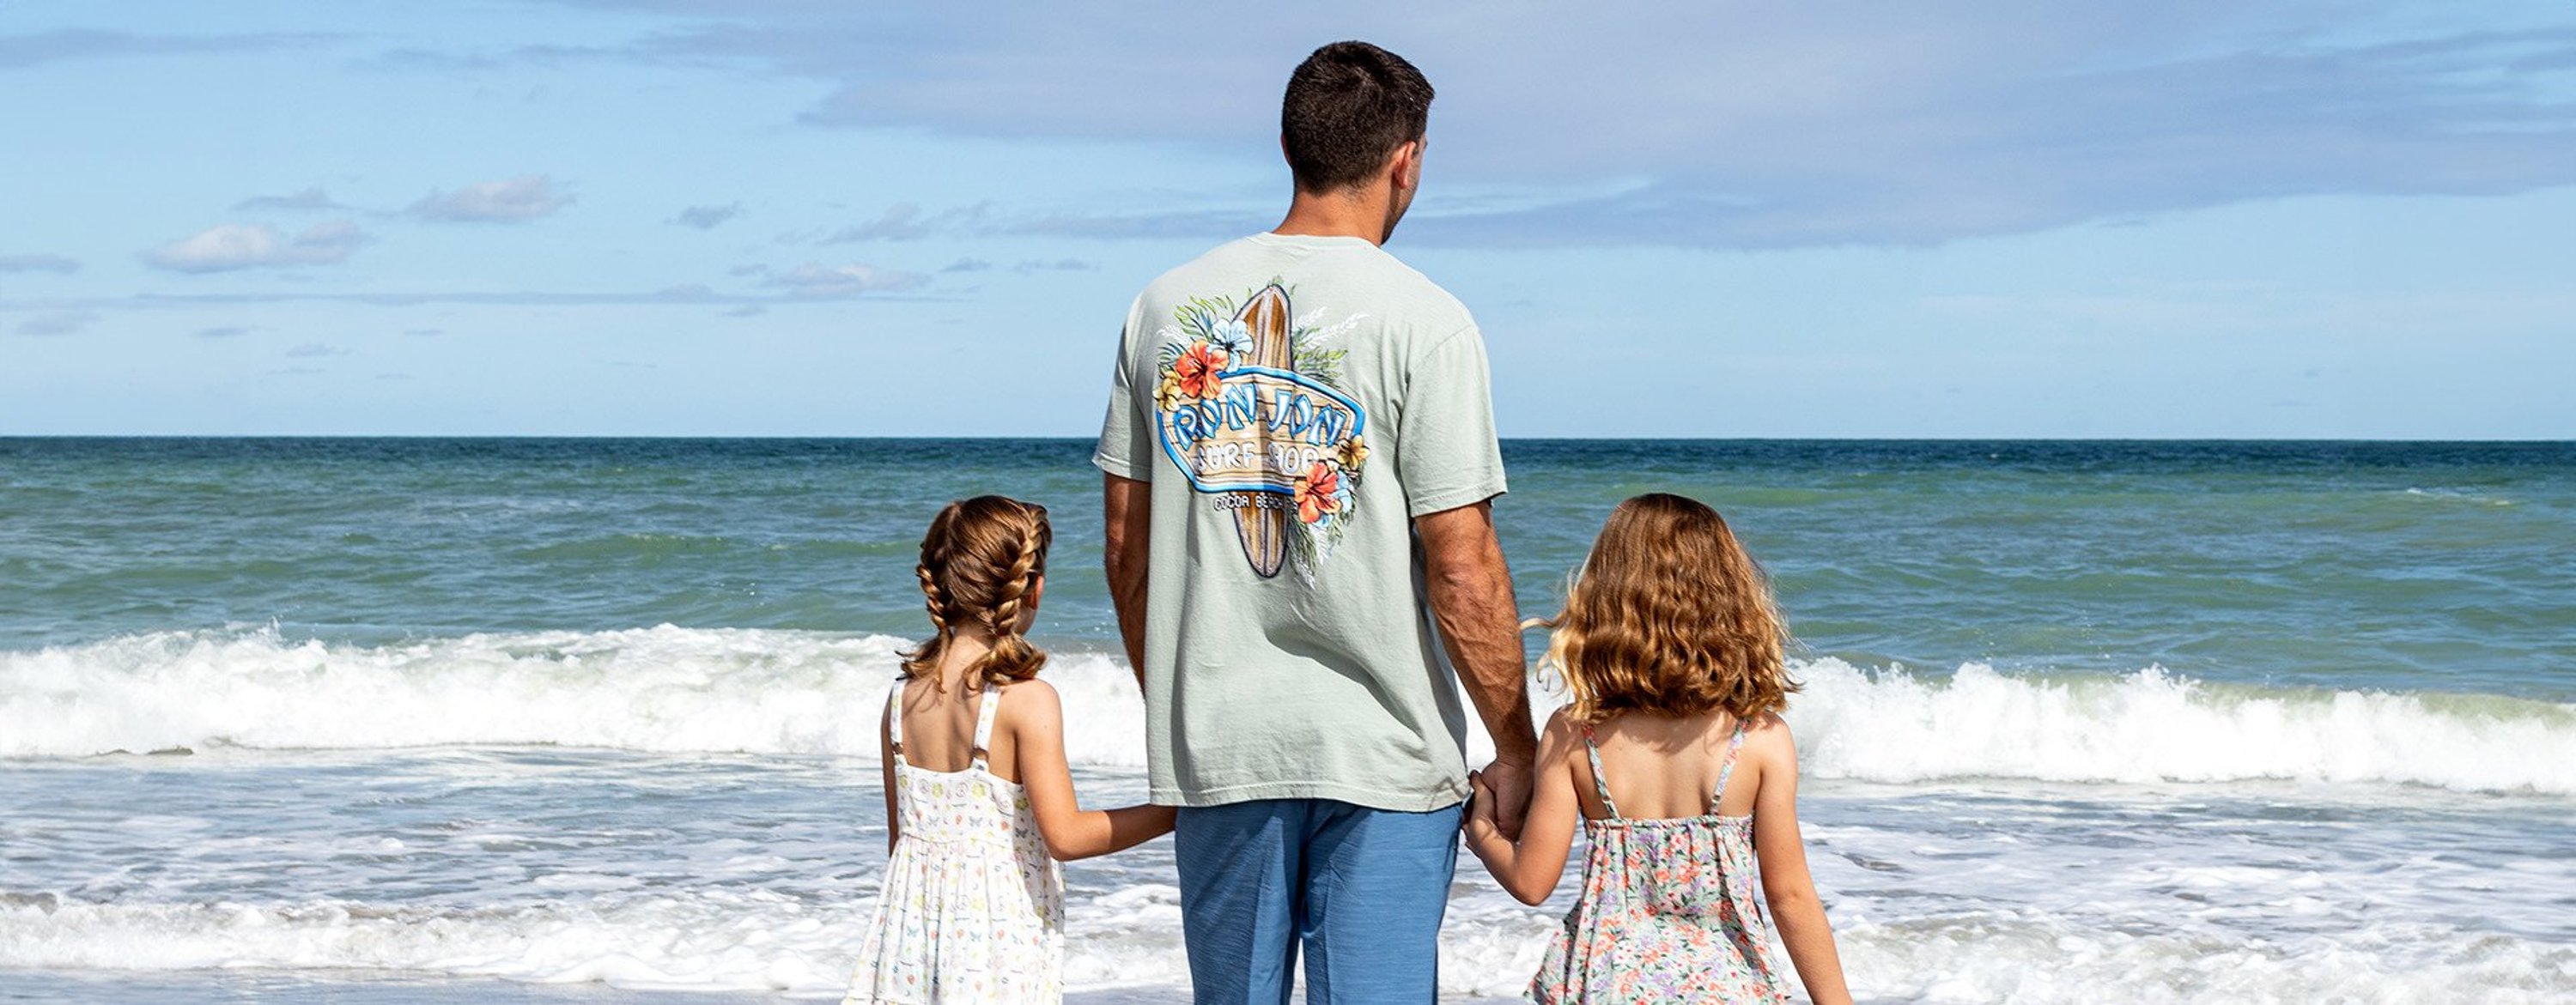 a dad standing at the edge of the ocean with two young daughters looking out to sea